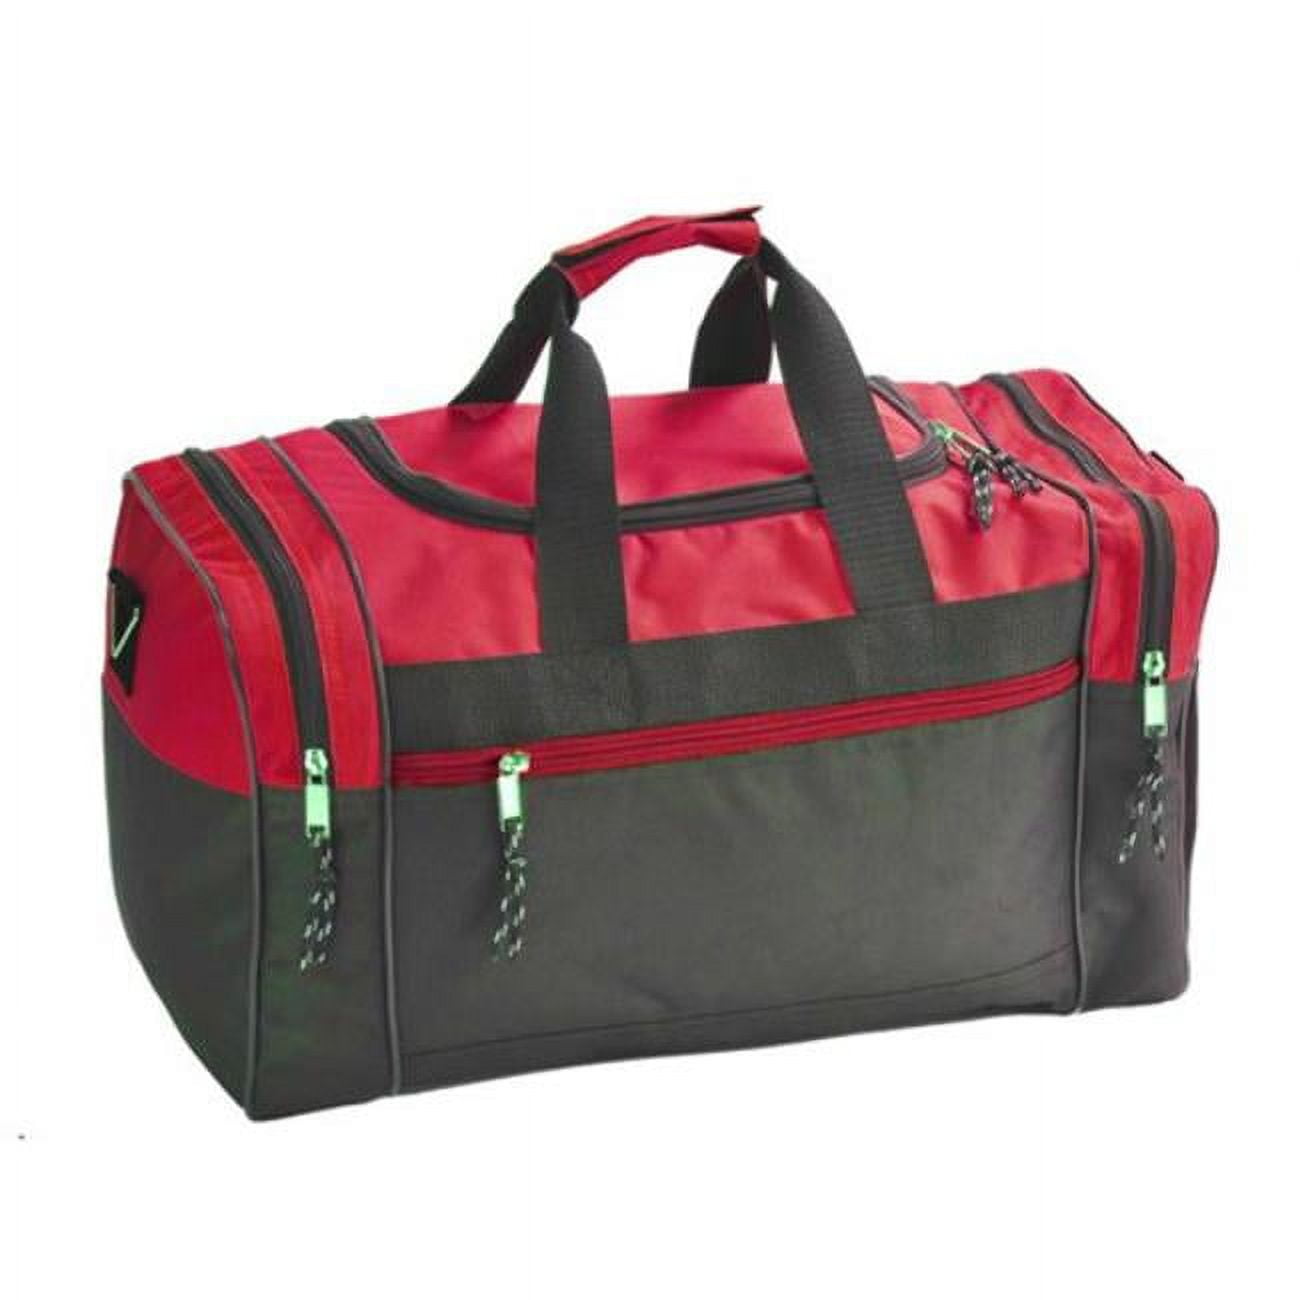 2333748 17 In. Poly Duffel Bag - Black & Red, Case Of 24